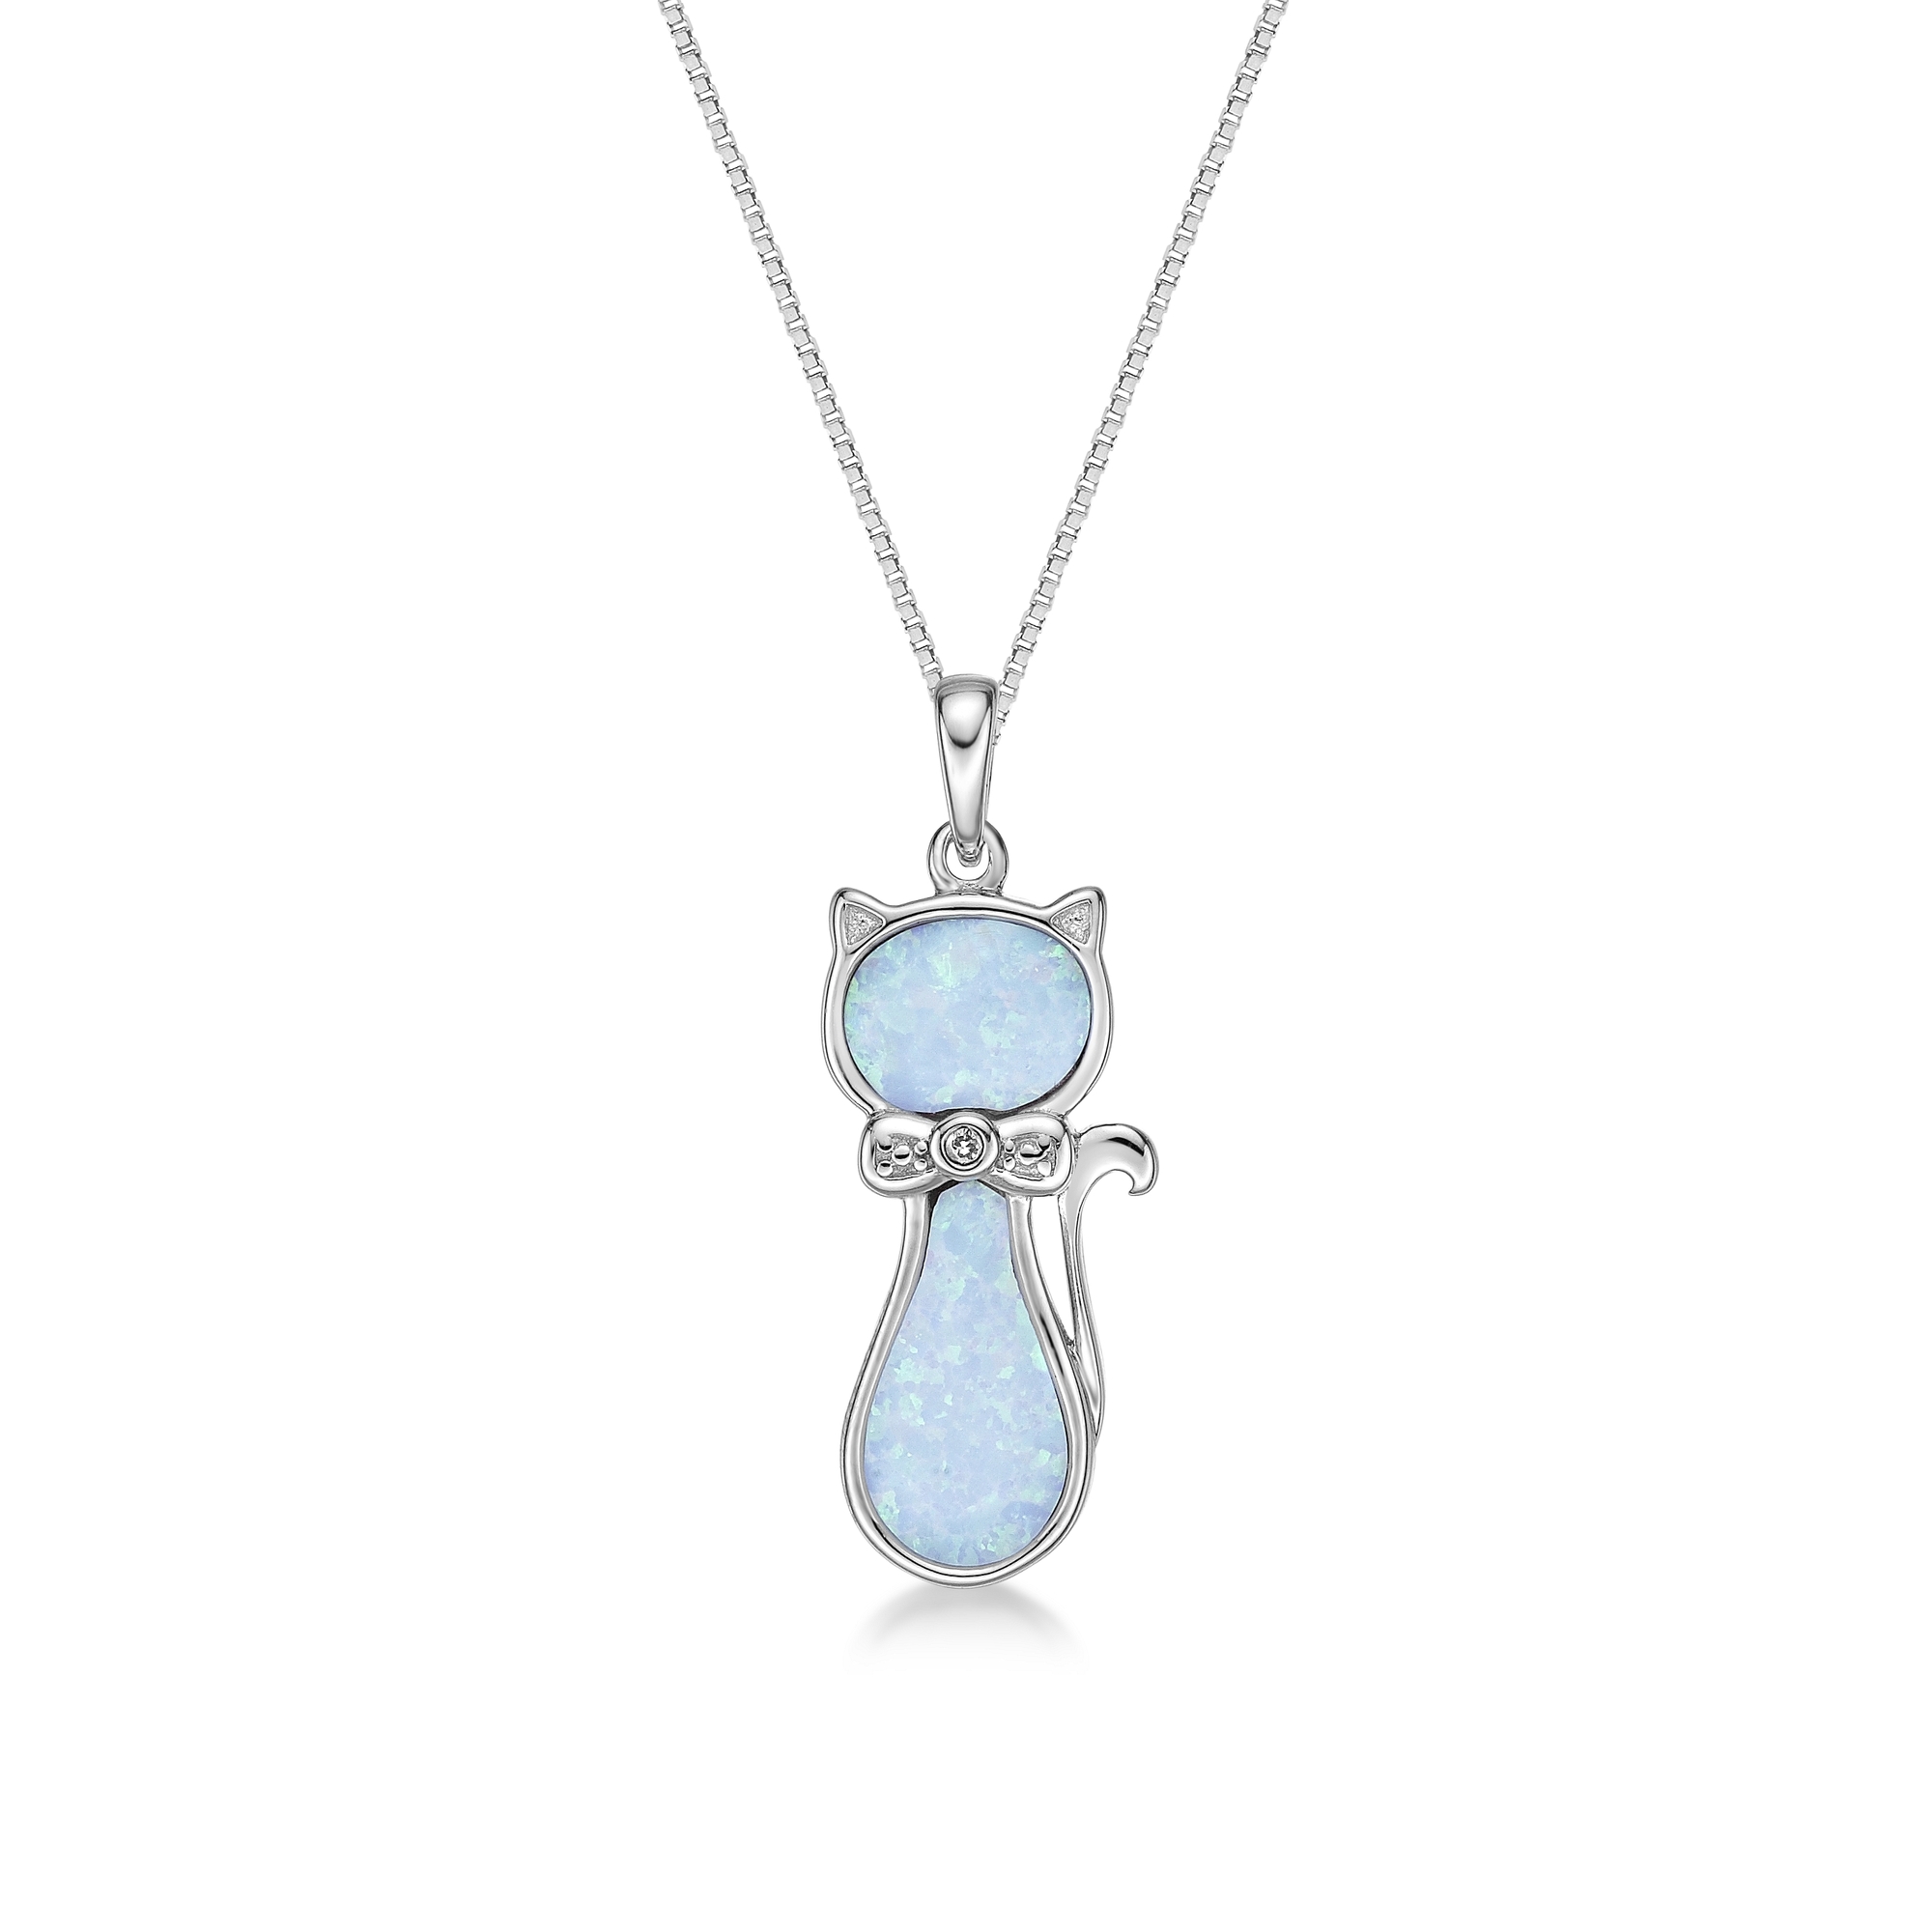 Lavari Jewelers Women's Created White Opal Cat Diamond Pendant with Lobster Clasp, Sterling Silver, .004 Cttw, 18 Inch Cable Chain